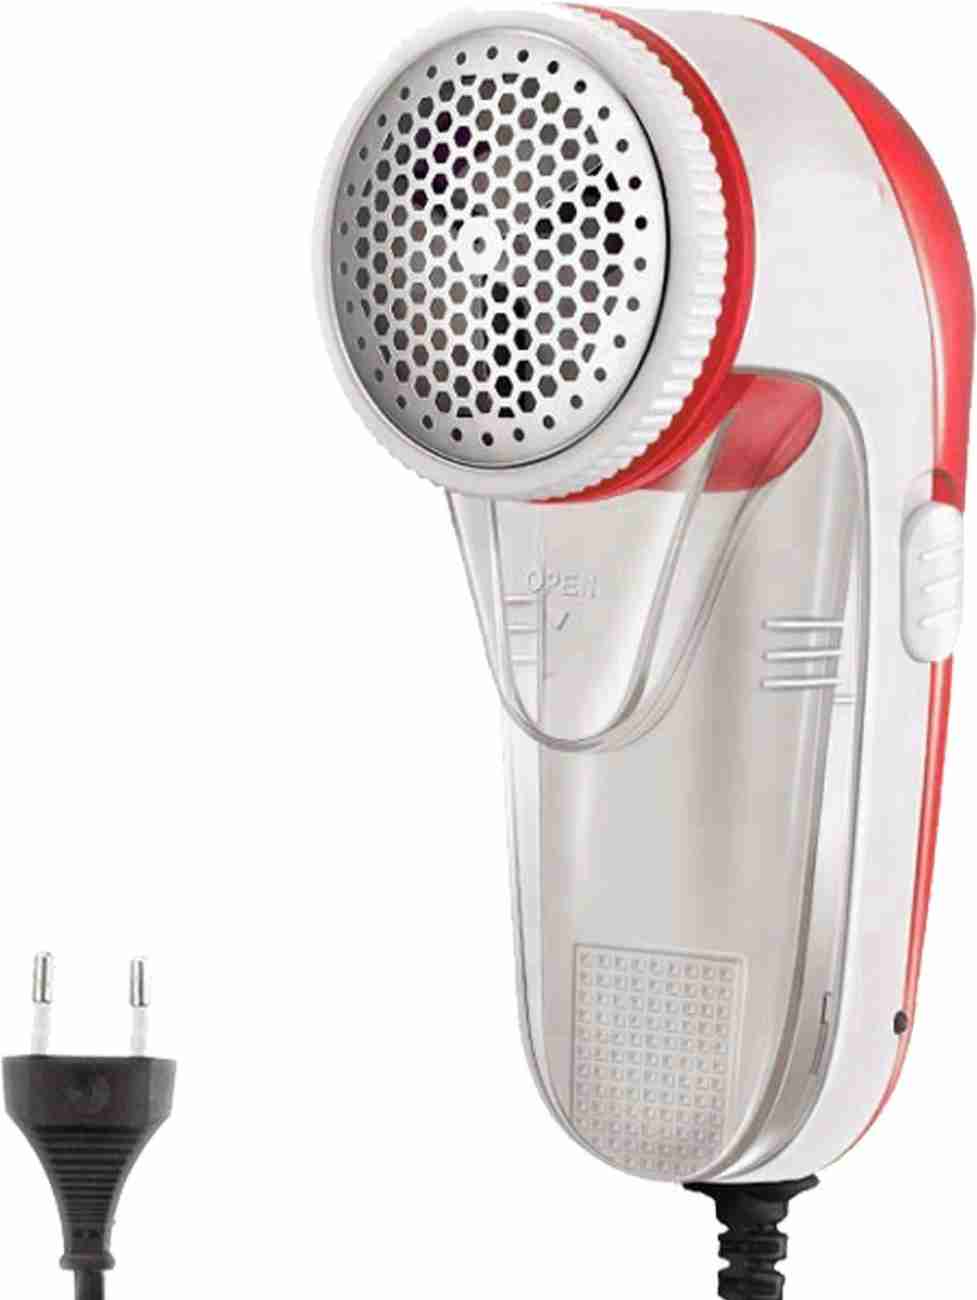 Pick Ur Needs Rocklight High Range Electric Lint Remover/Fabric Shaver Lint  Roller